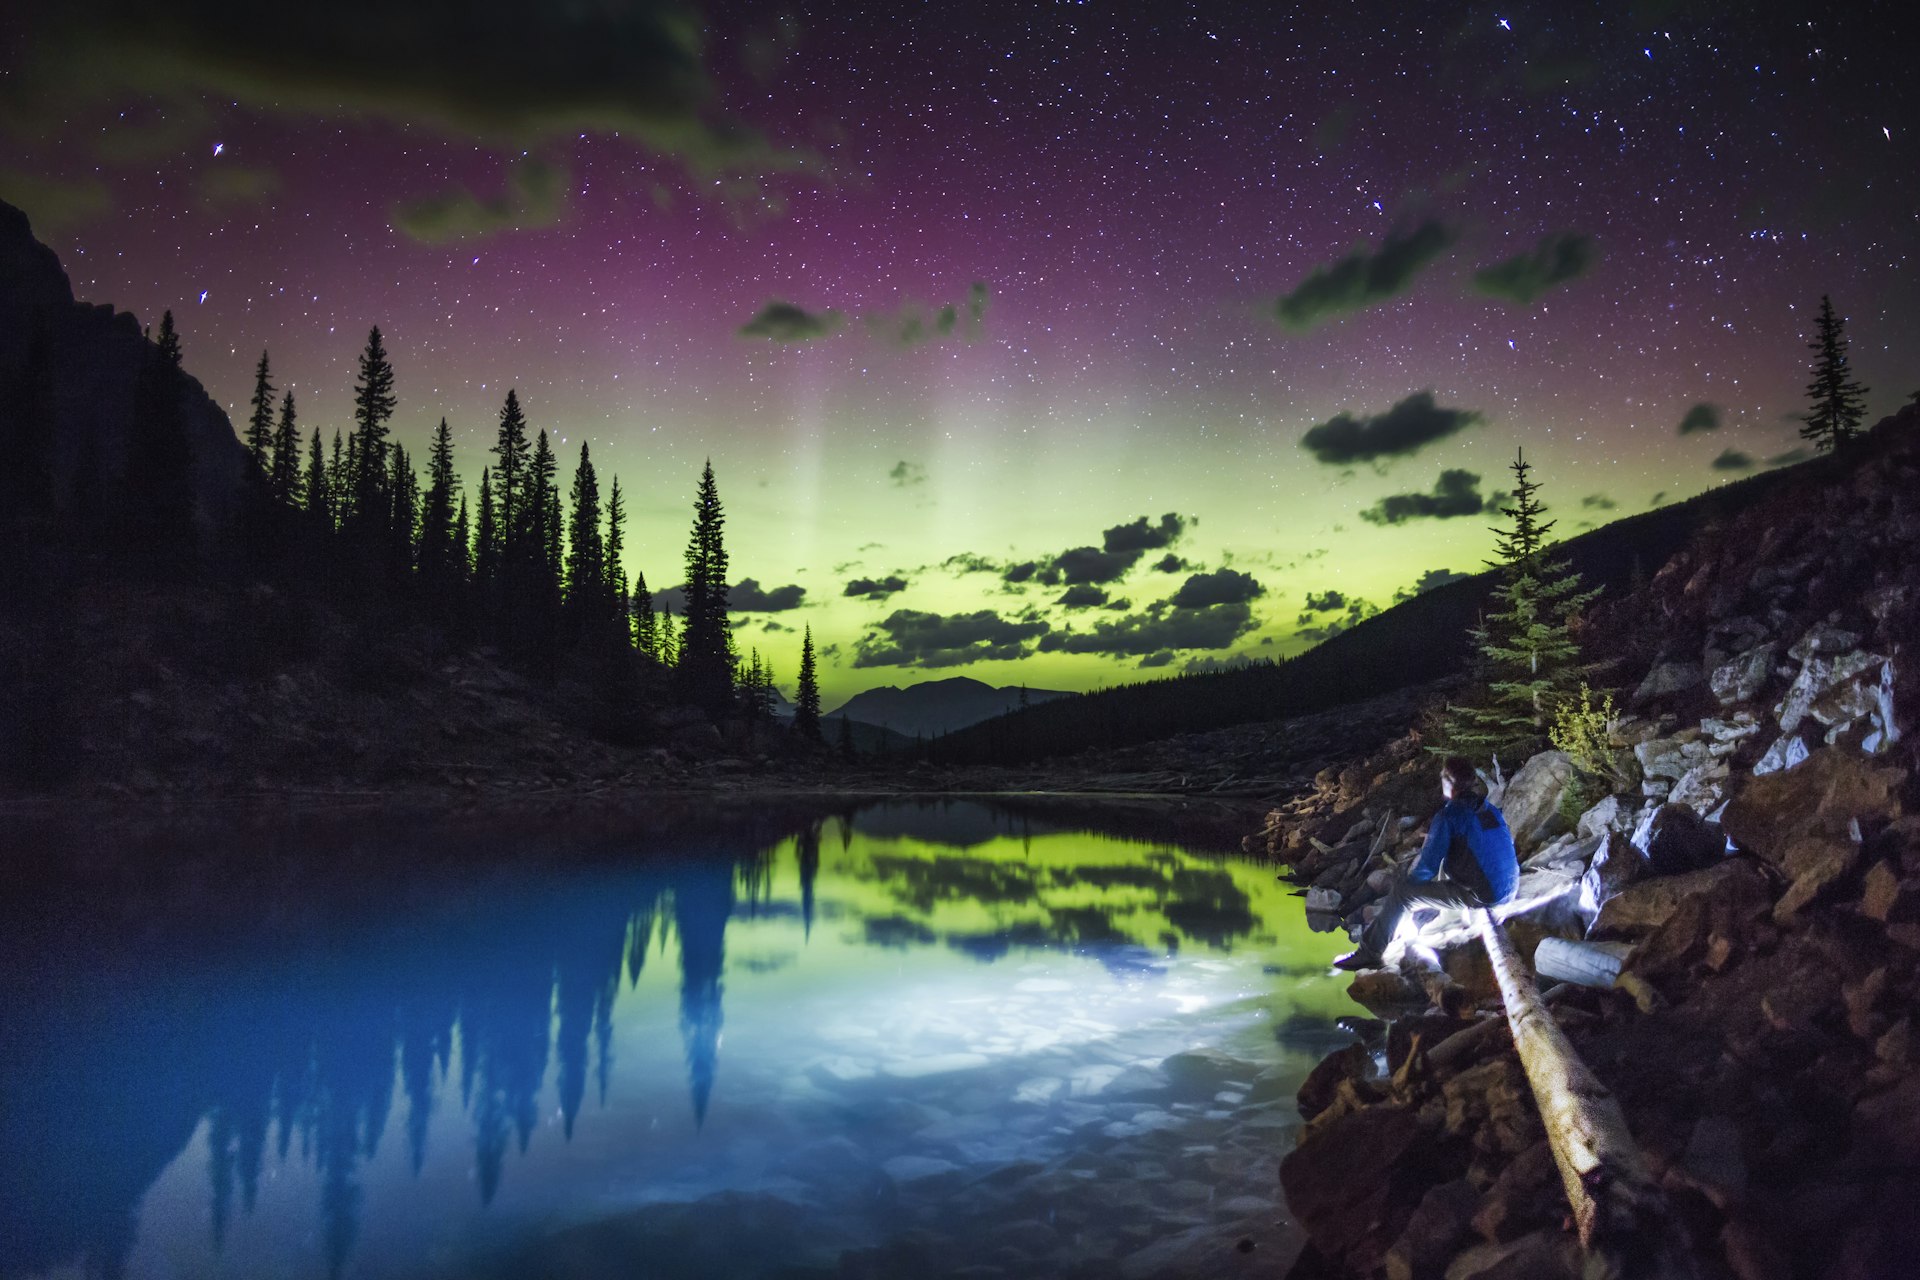 A person sits by a calm lake at night, with the Northern Lights (aurora borealis) shimmering in the sky above, reflecting in the water, surrounded by silhouetted pine trees.